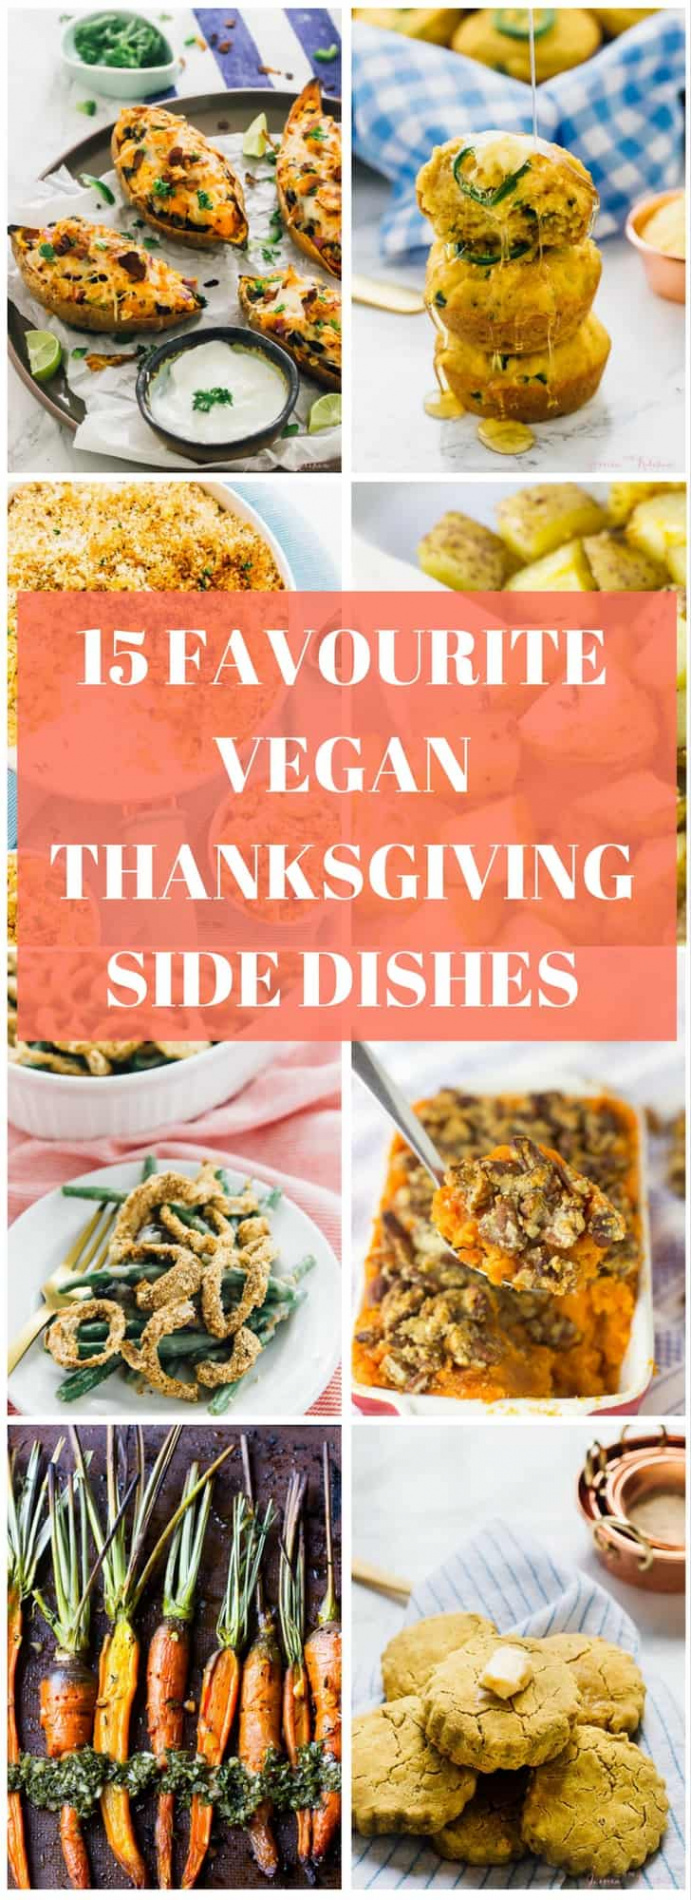 Favourite Vegan Thanksgiving Side Dishes - Jessica in the Kitchen